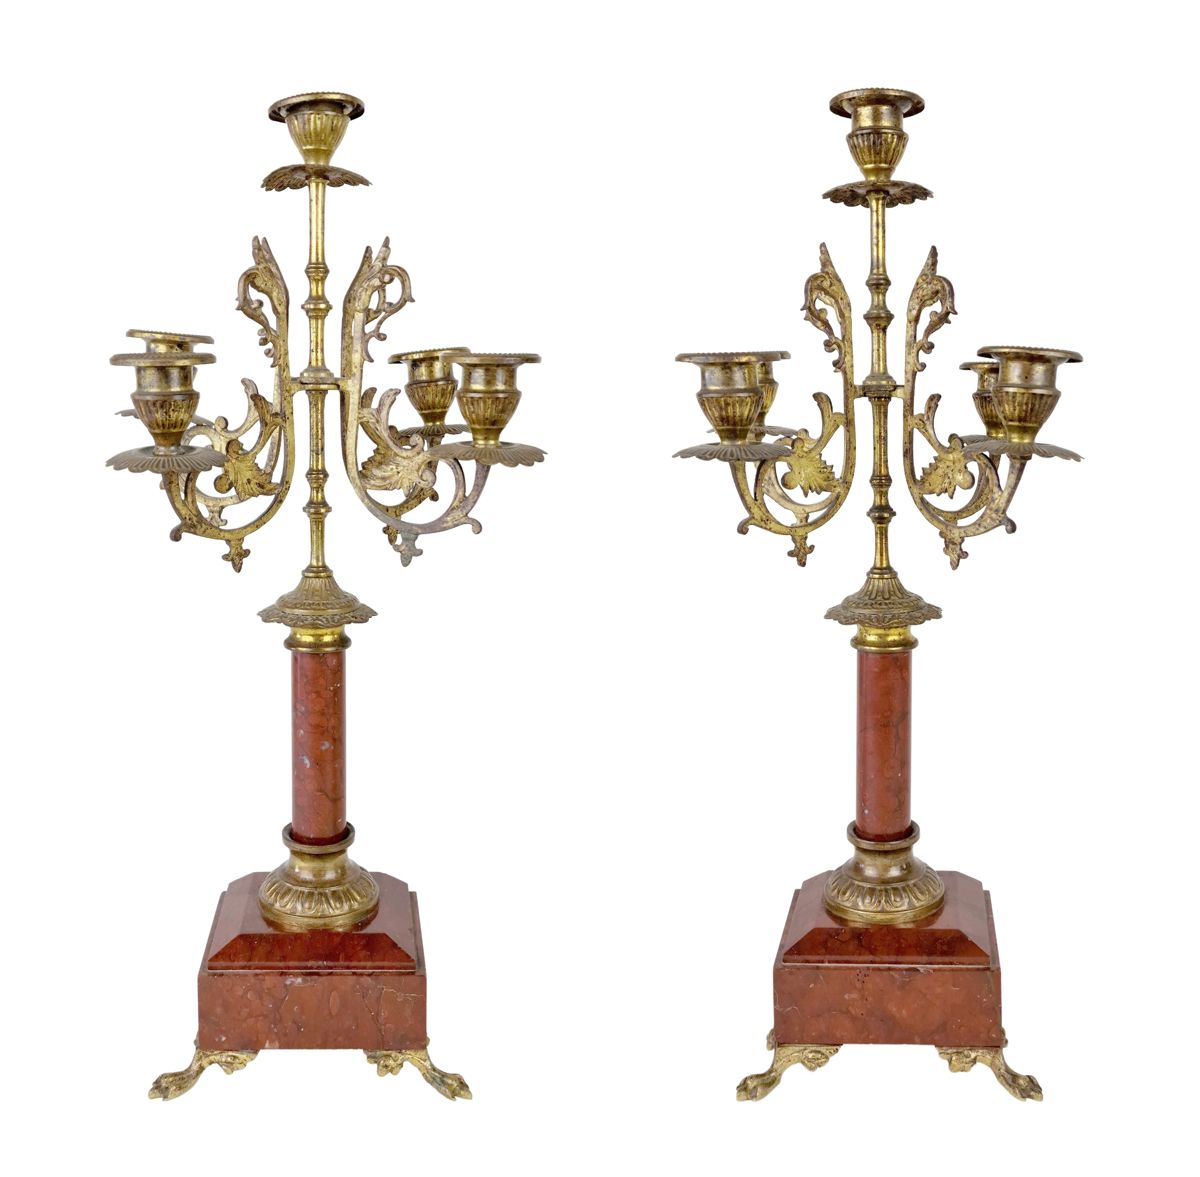 FRANCE, 19ème SIECLE Pair of candelabras
With five arms of light, in griotte mar&hellip;